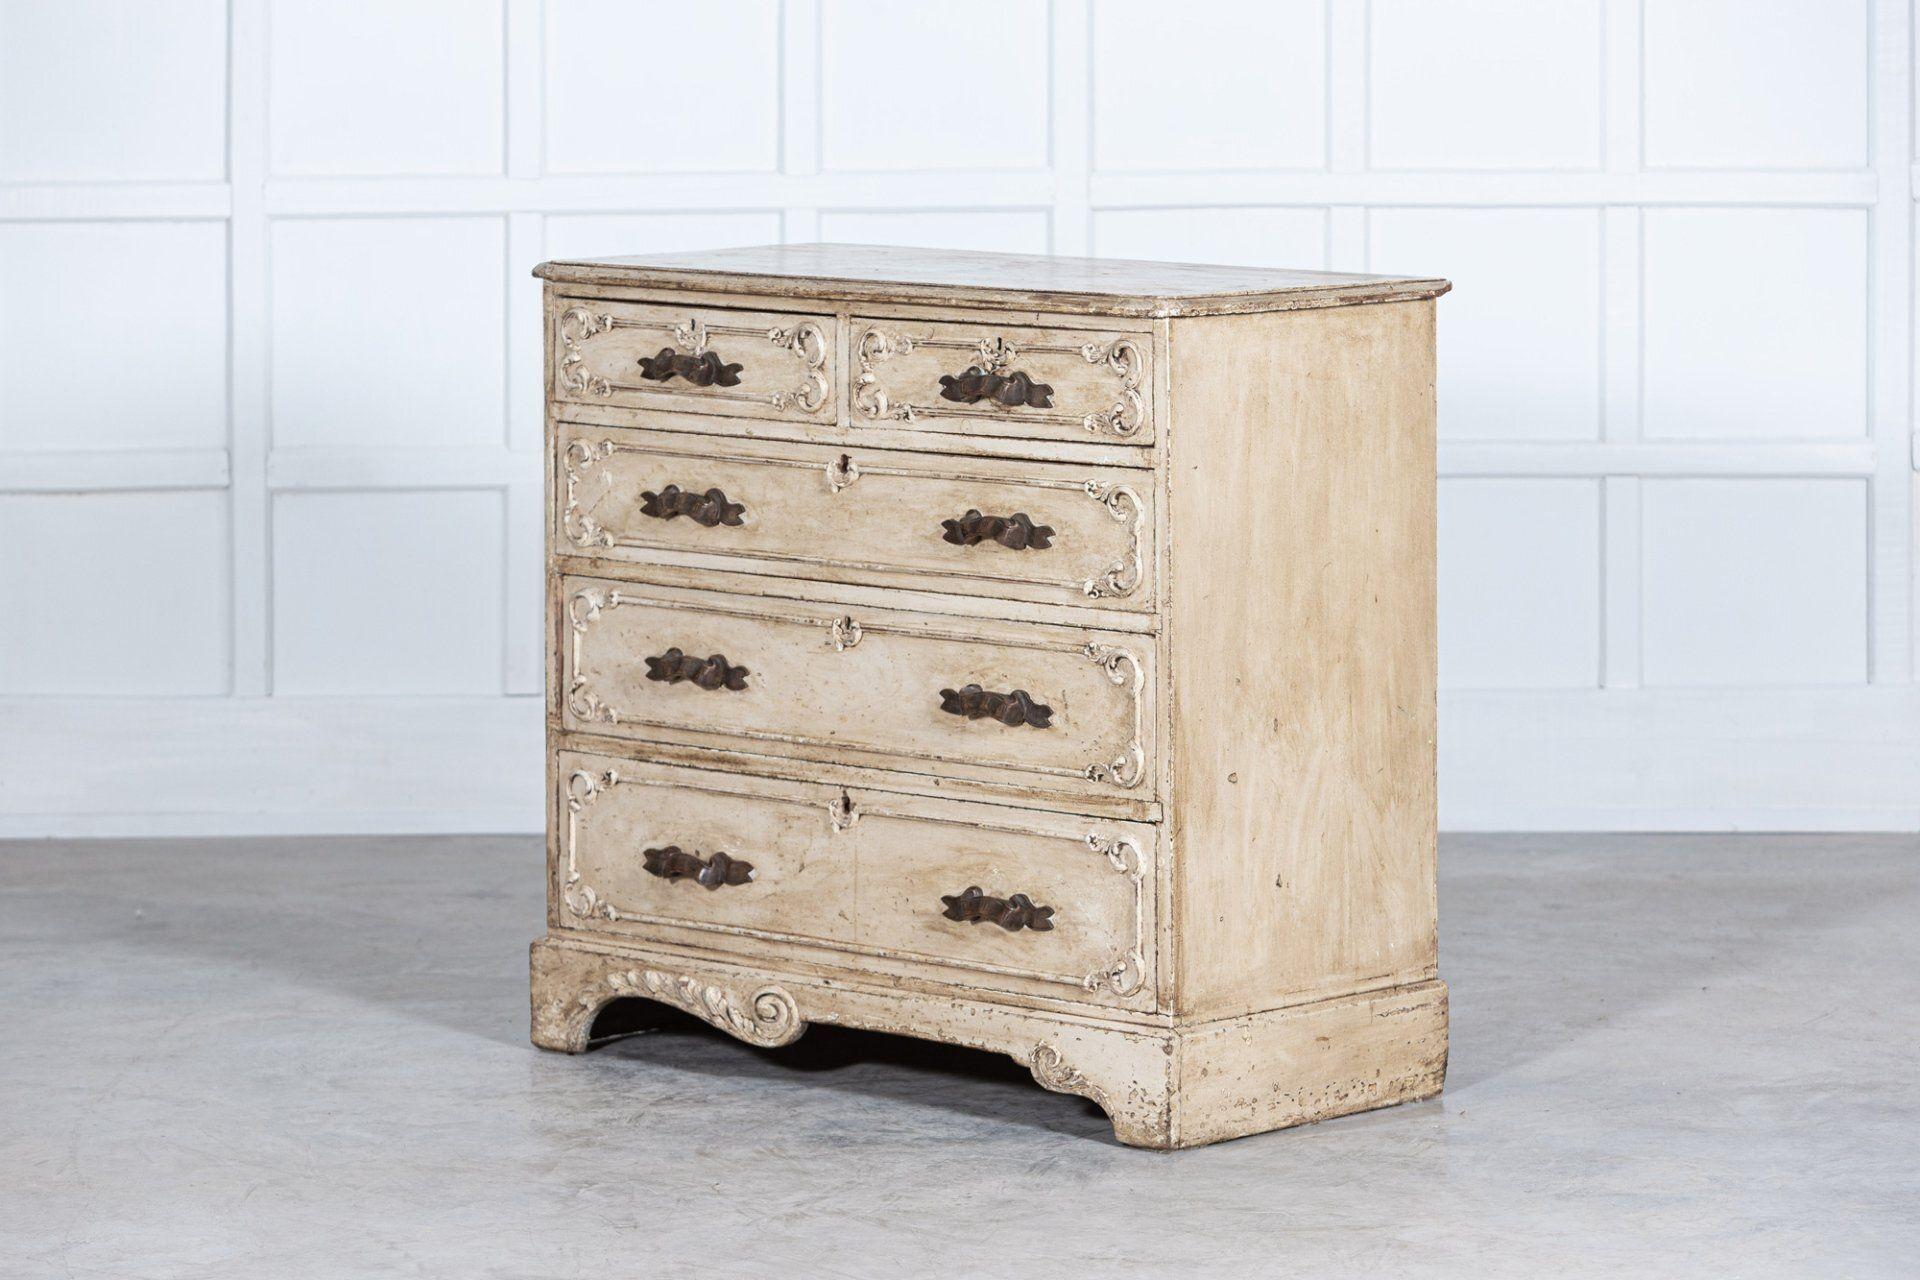 circa 1880
19thC French Painted Graduated Chest of Drawers with Carved Bow Handles

Measures: W107 x D54 x H97 cm.